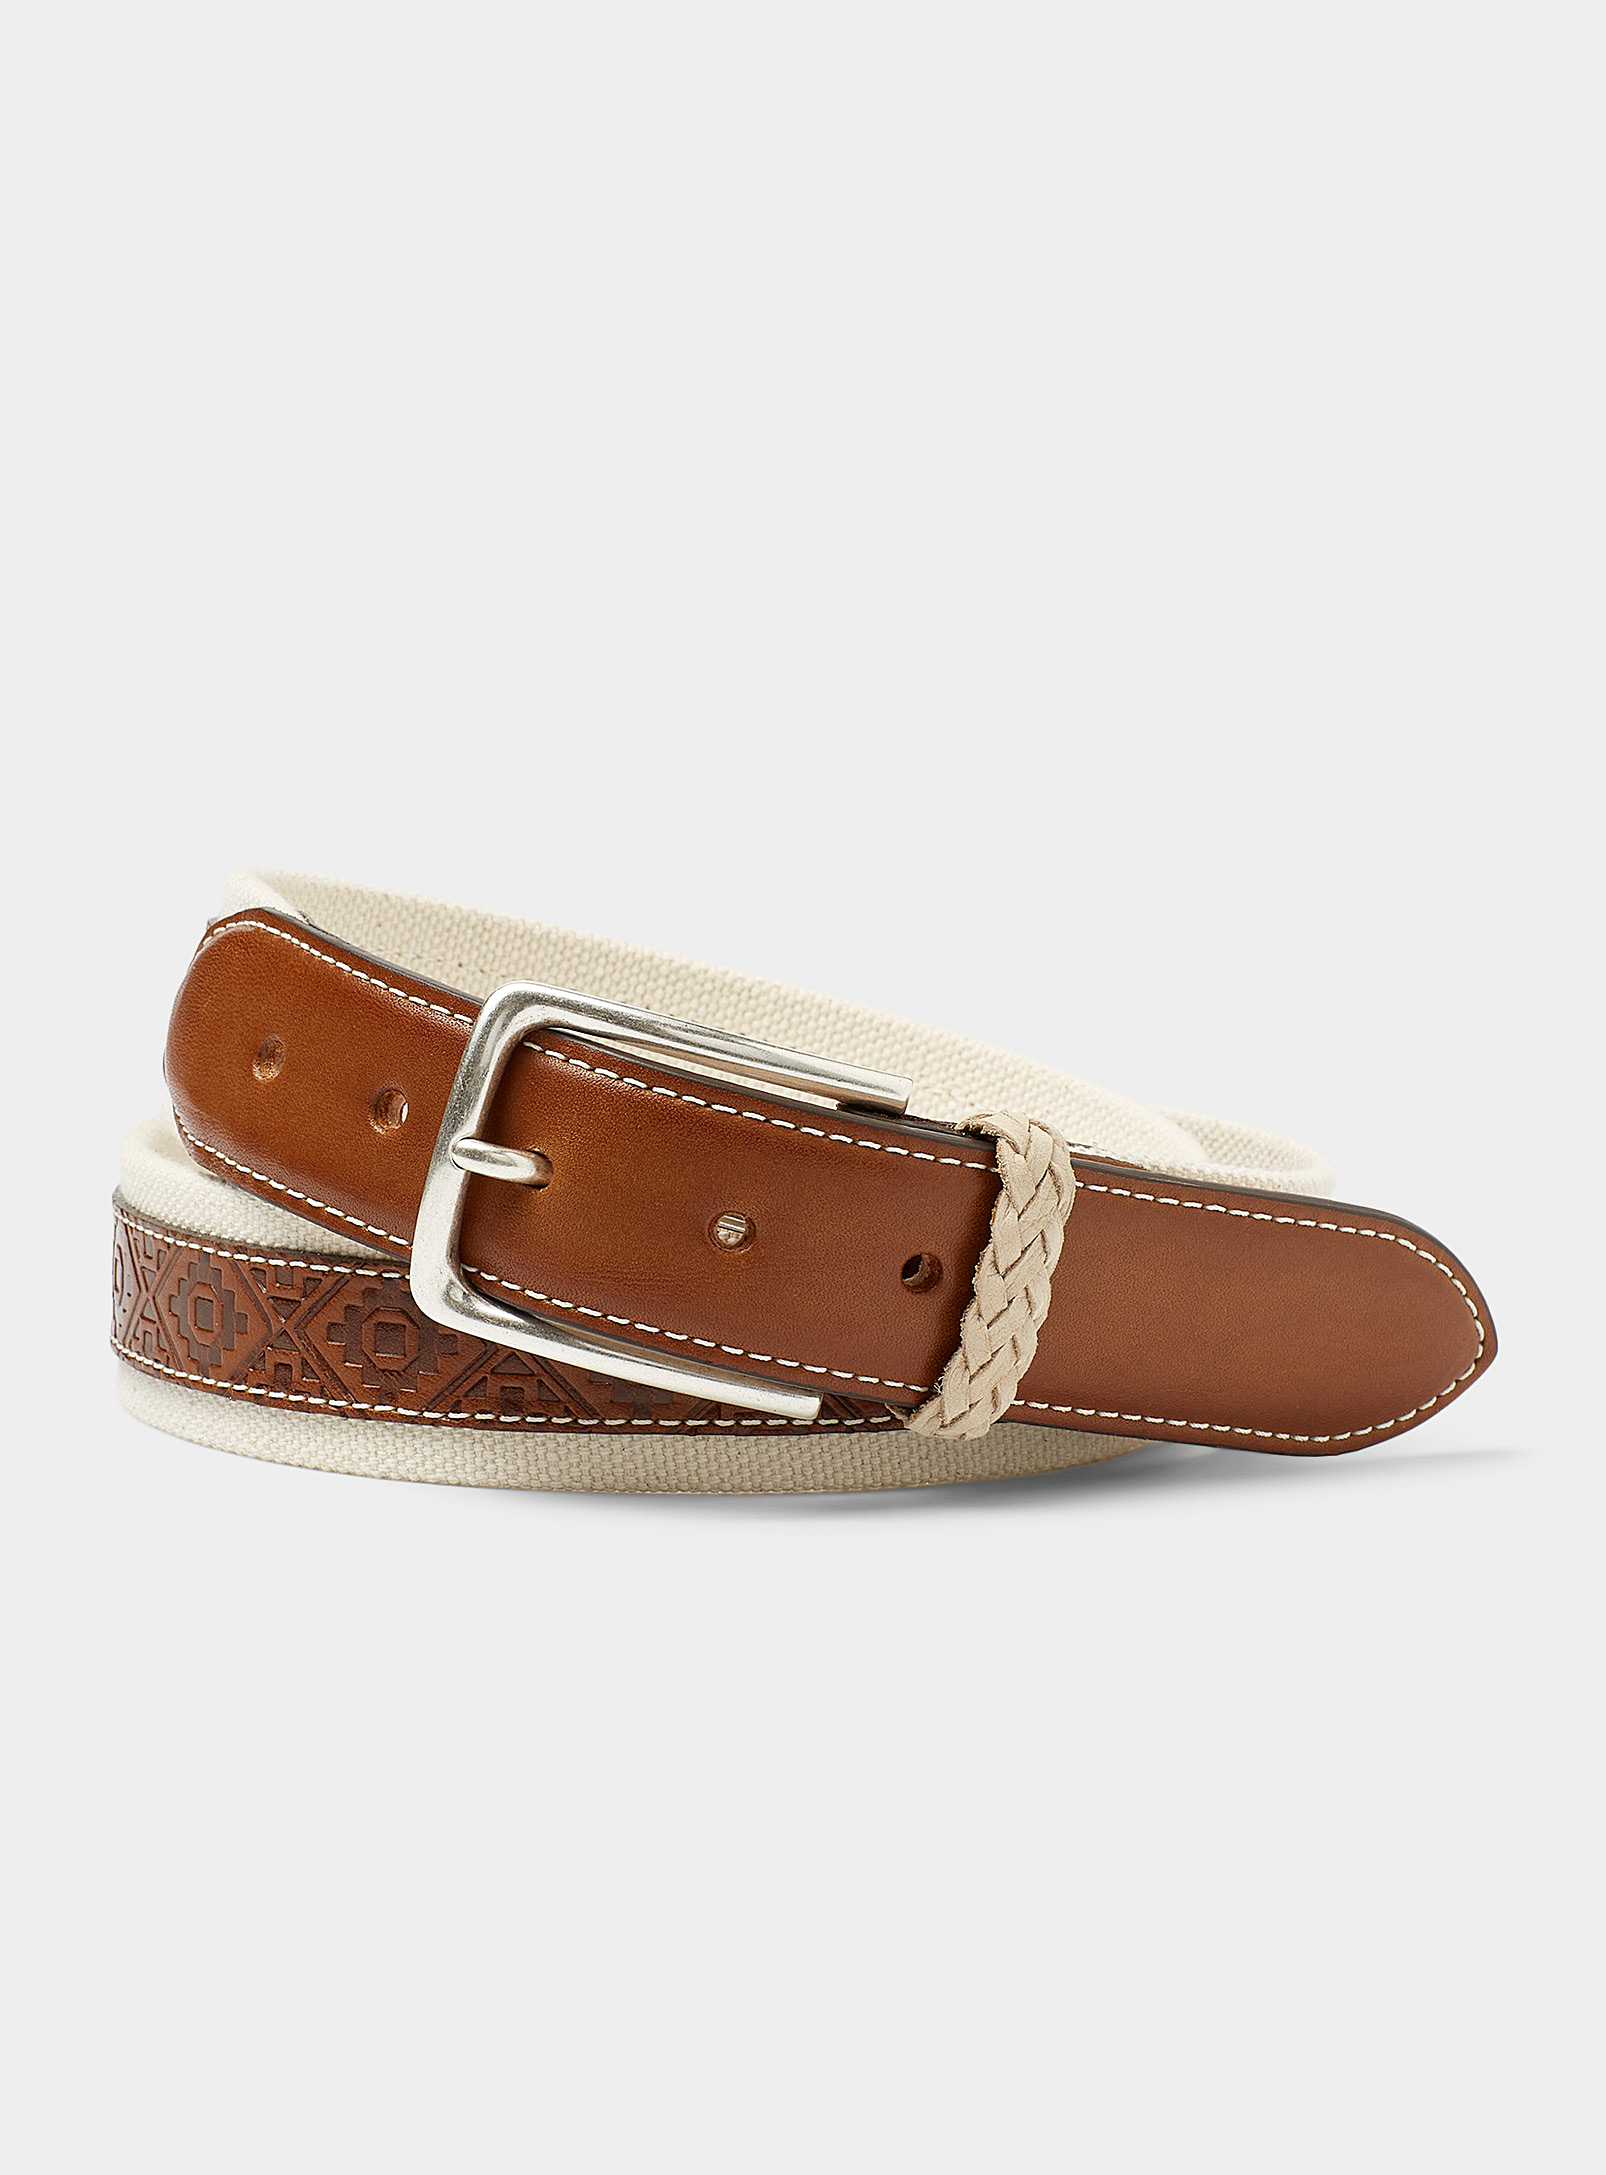 Le 31 Geo Leather Woven Belt In Brown